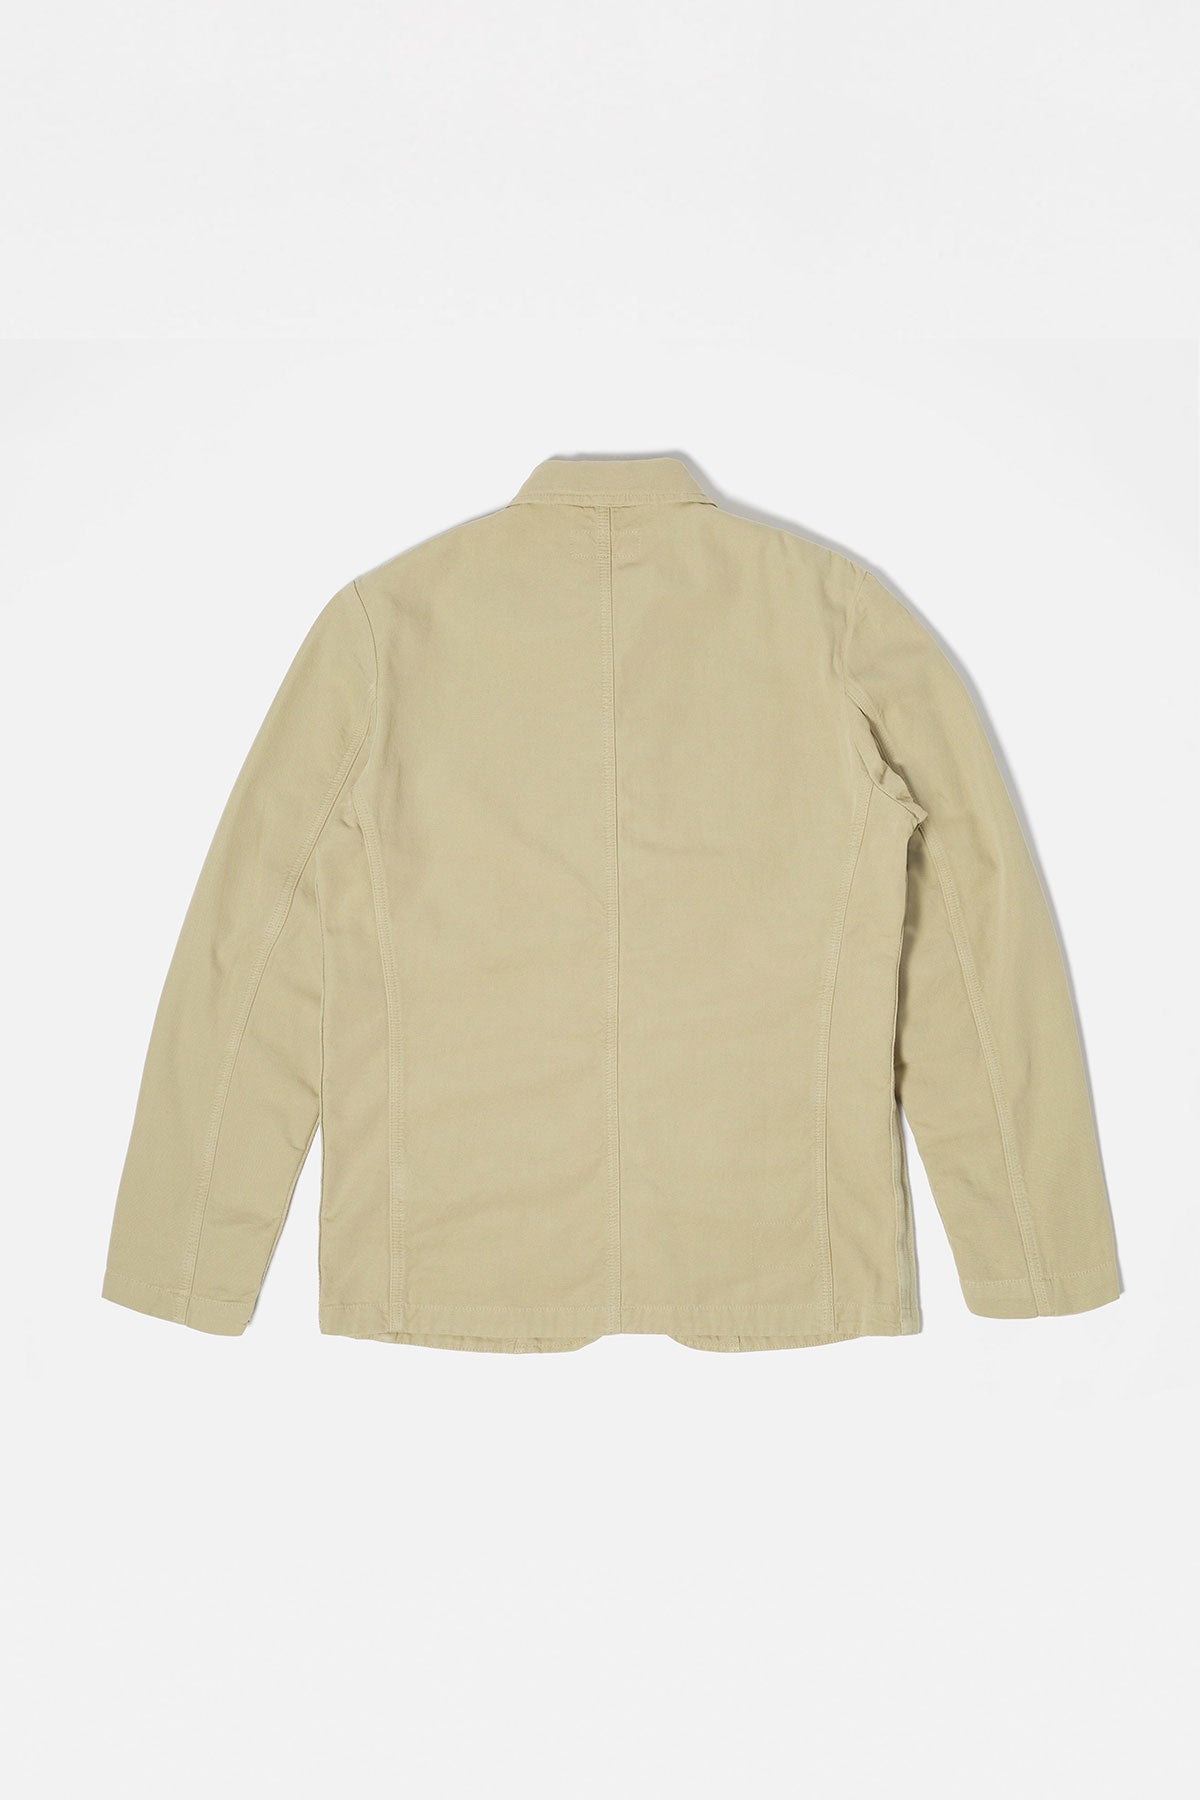 Universal Works Bakers Jacket In Sand Canvas